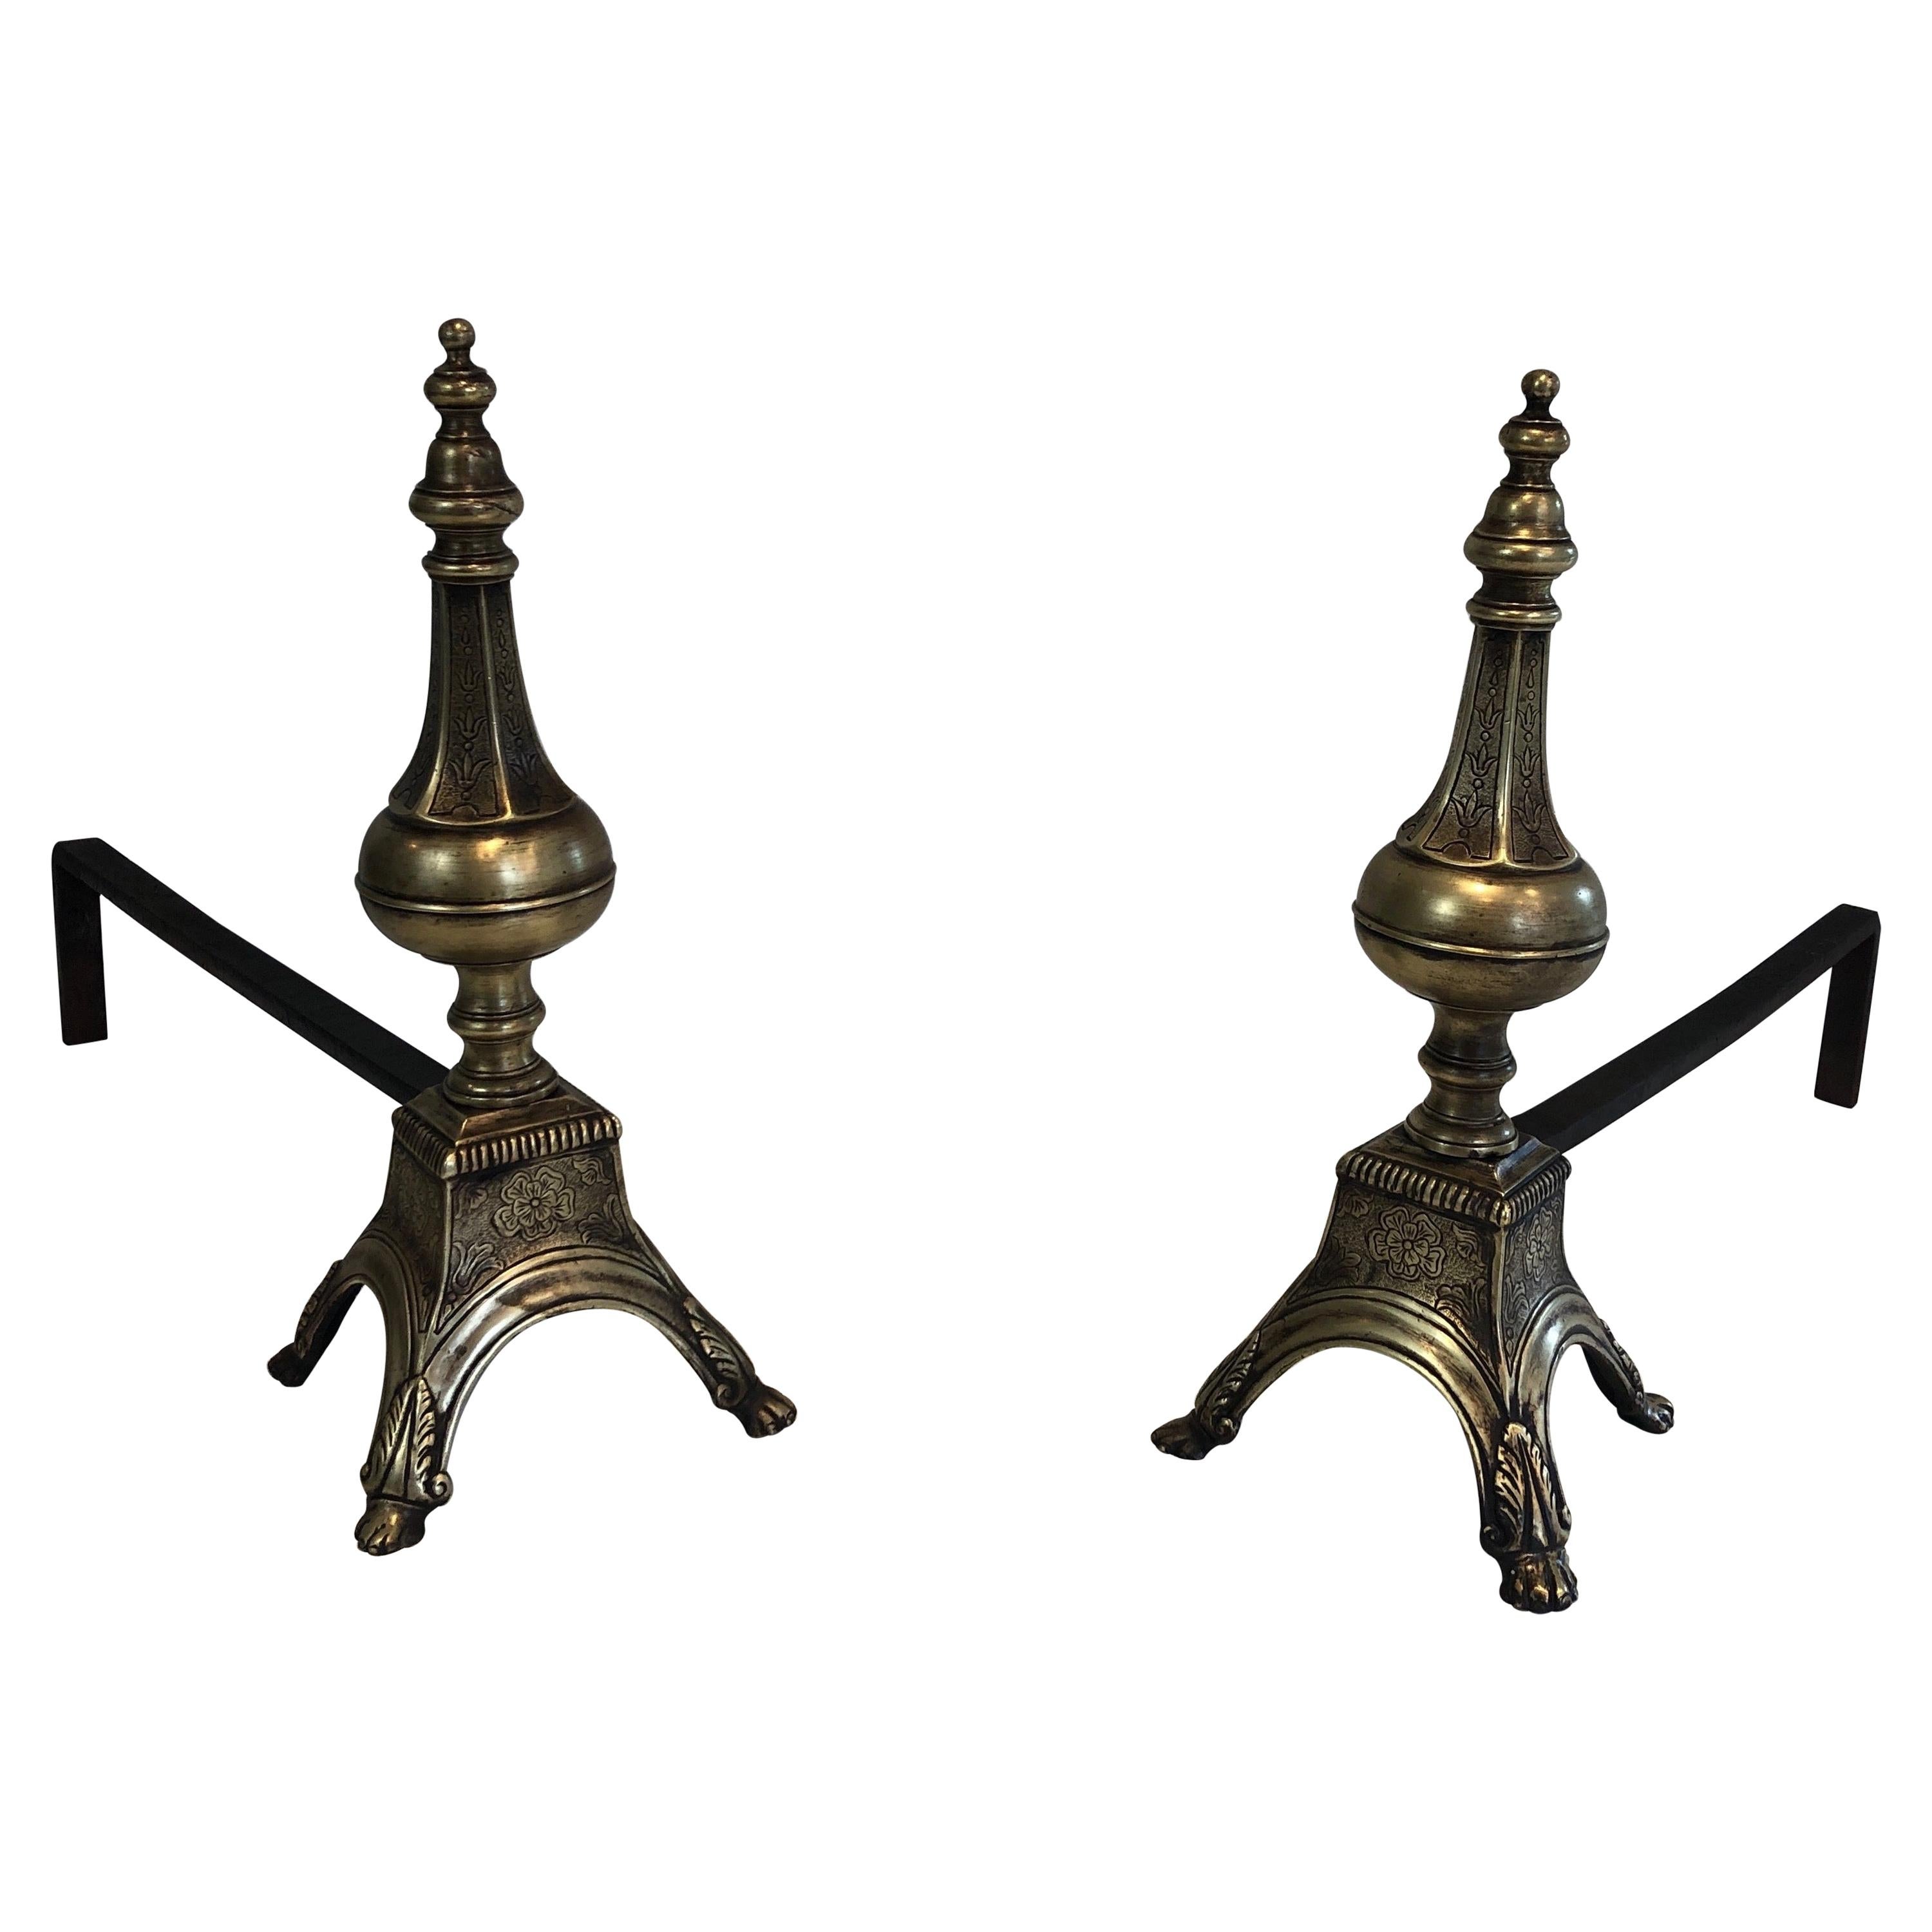 Rare Pair of Louis the 16th Style Bronze & Wrought Iron Andirons, 19th Century For Sale